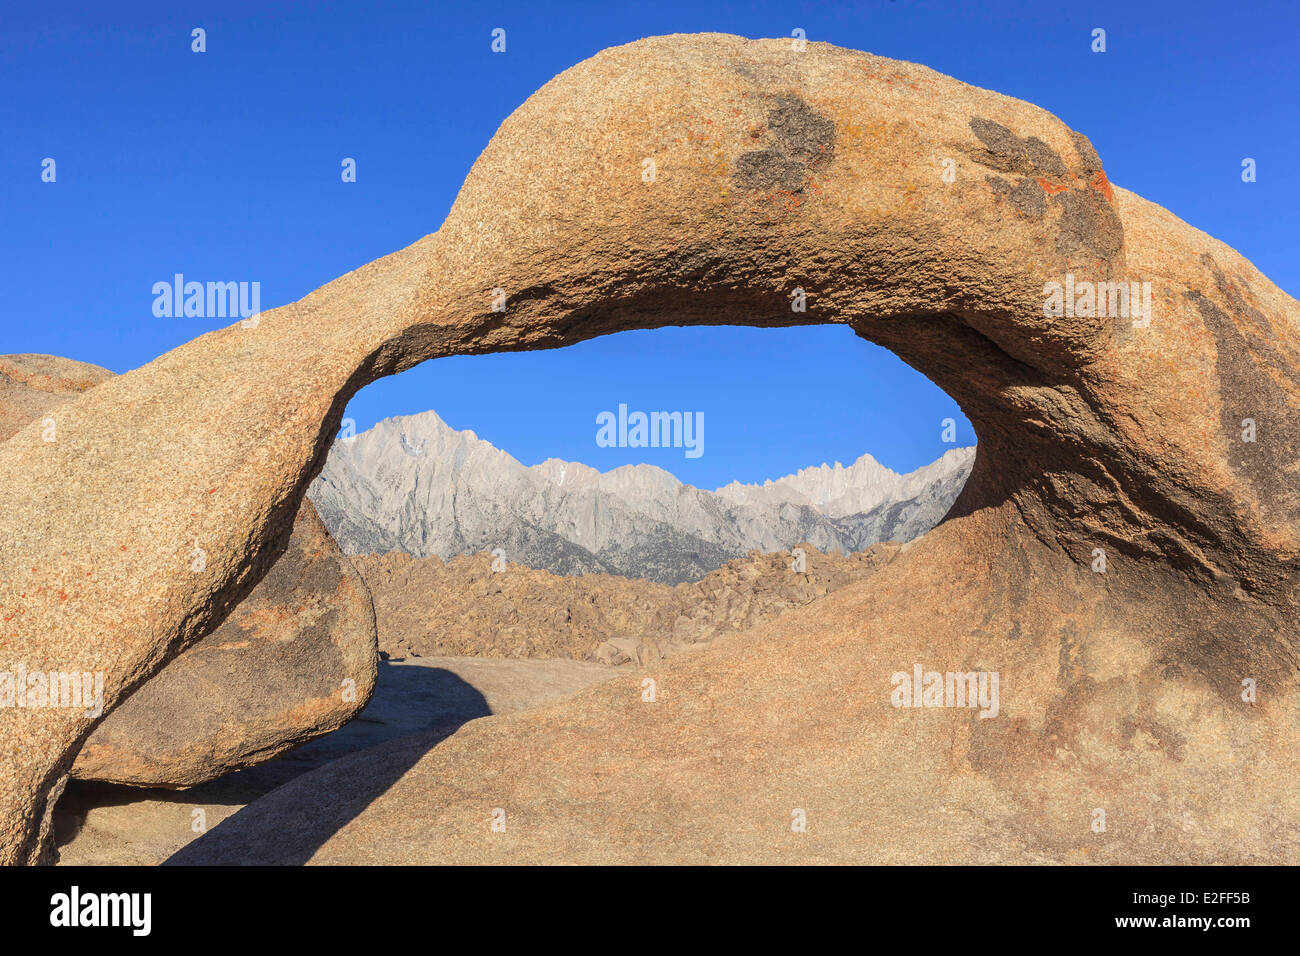 United States California Inyo National Forest Sierra Nevada mountains Alabama Hills near Lone Pine Mobius Arch framing Mount Stock Photo